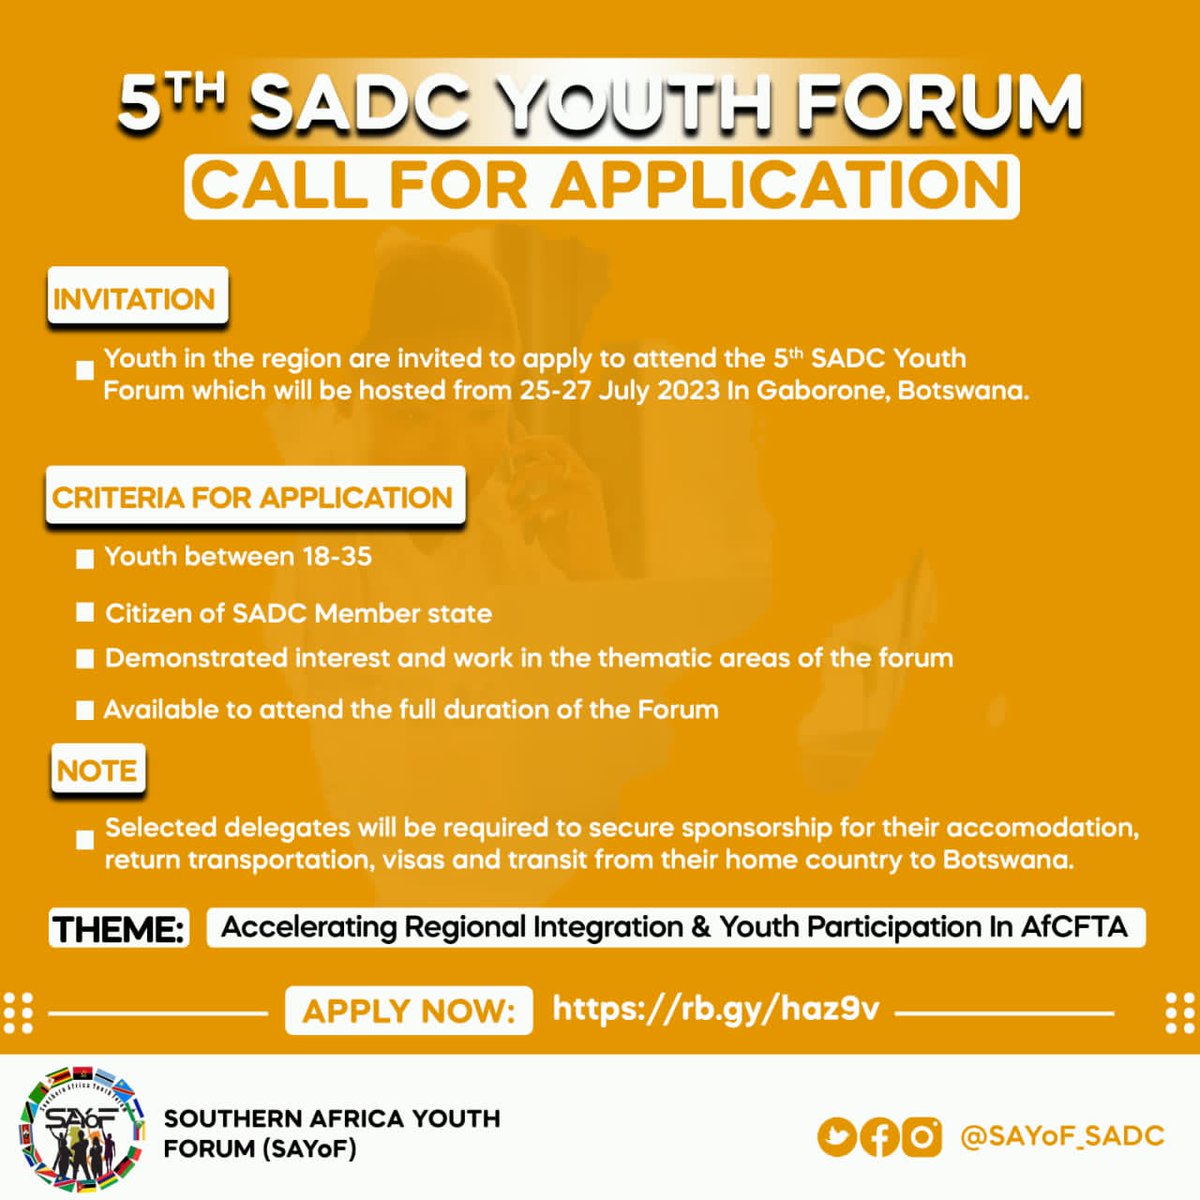 📢📢Call for Applications‼️

Youth in the region are invited to apply to attend the 5th SADC Youth Forum which will be hosted from 25-27 July in Gaborone, Botswana🇧🇼
#SADCYouth #SADCYouthForum

Application Link: rb.gy/haz9v